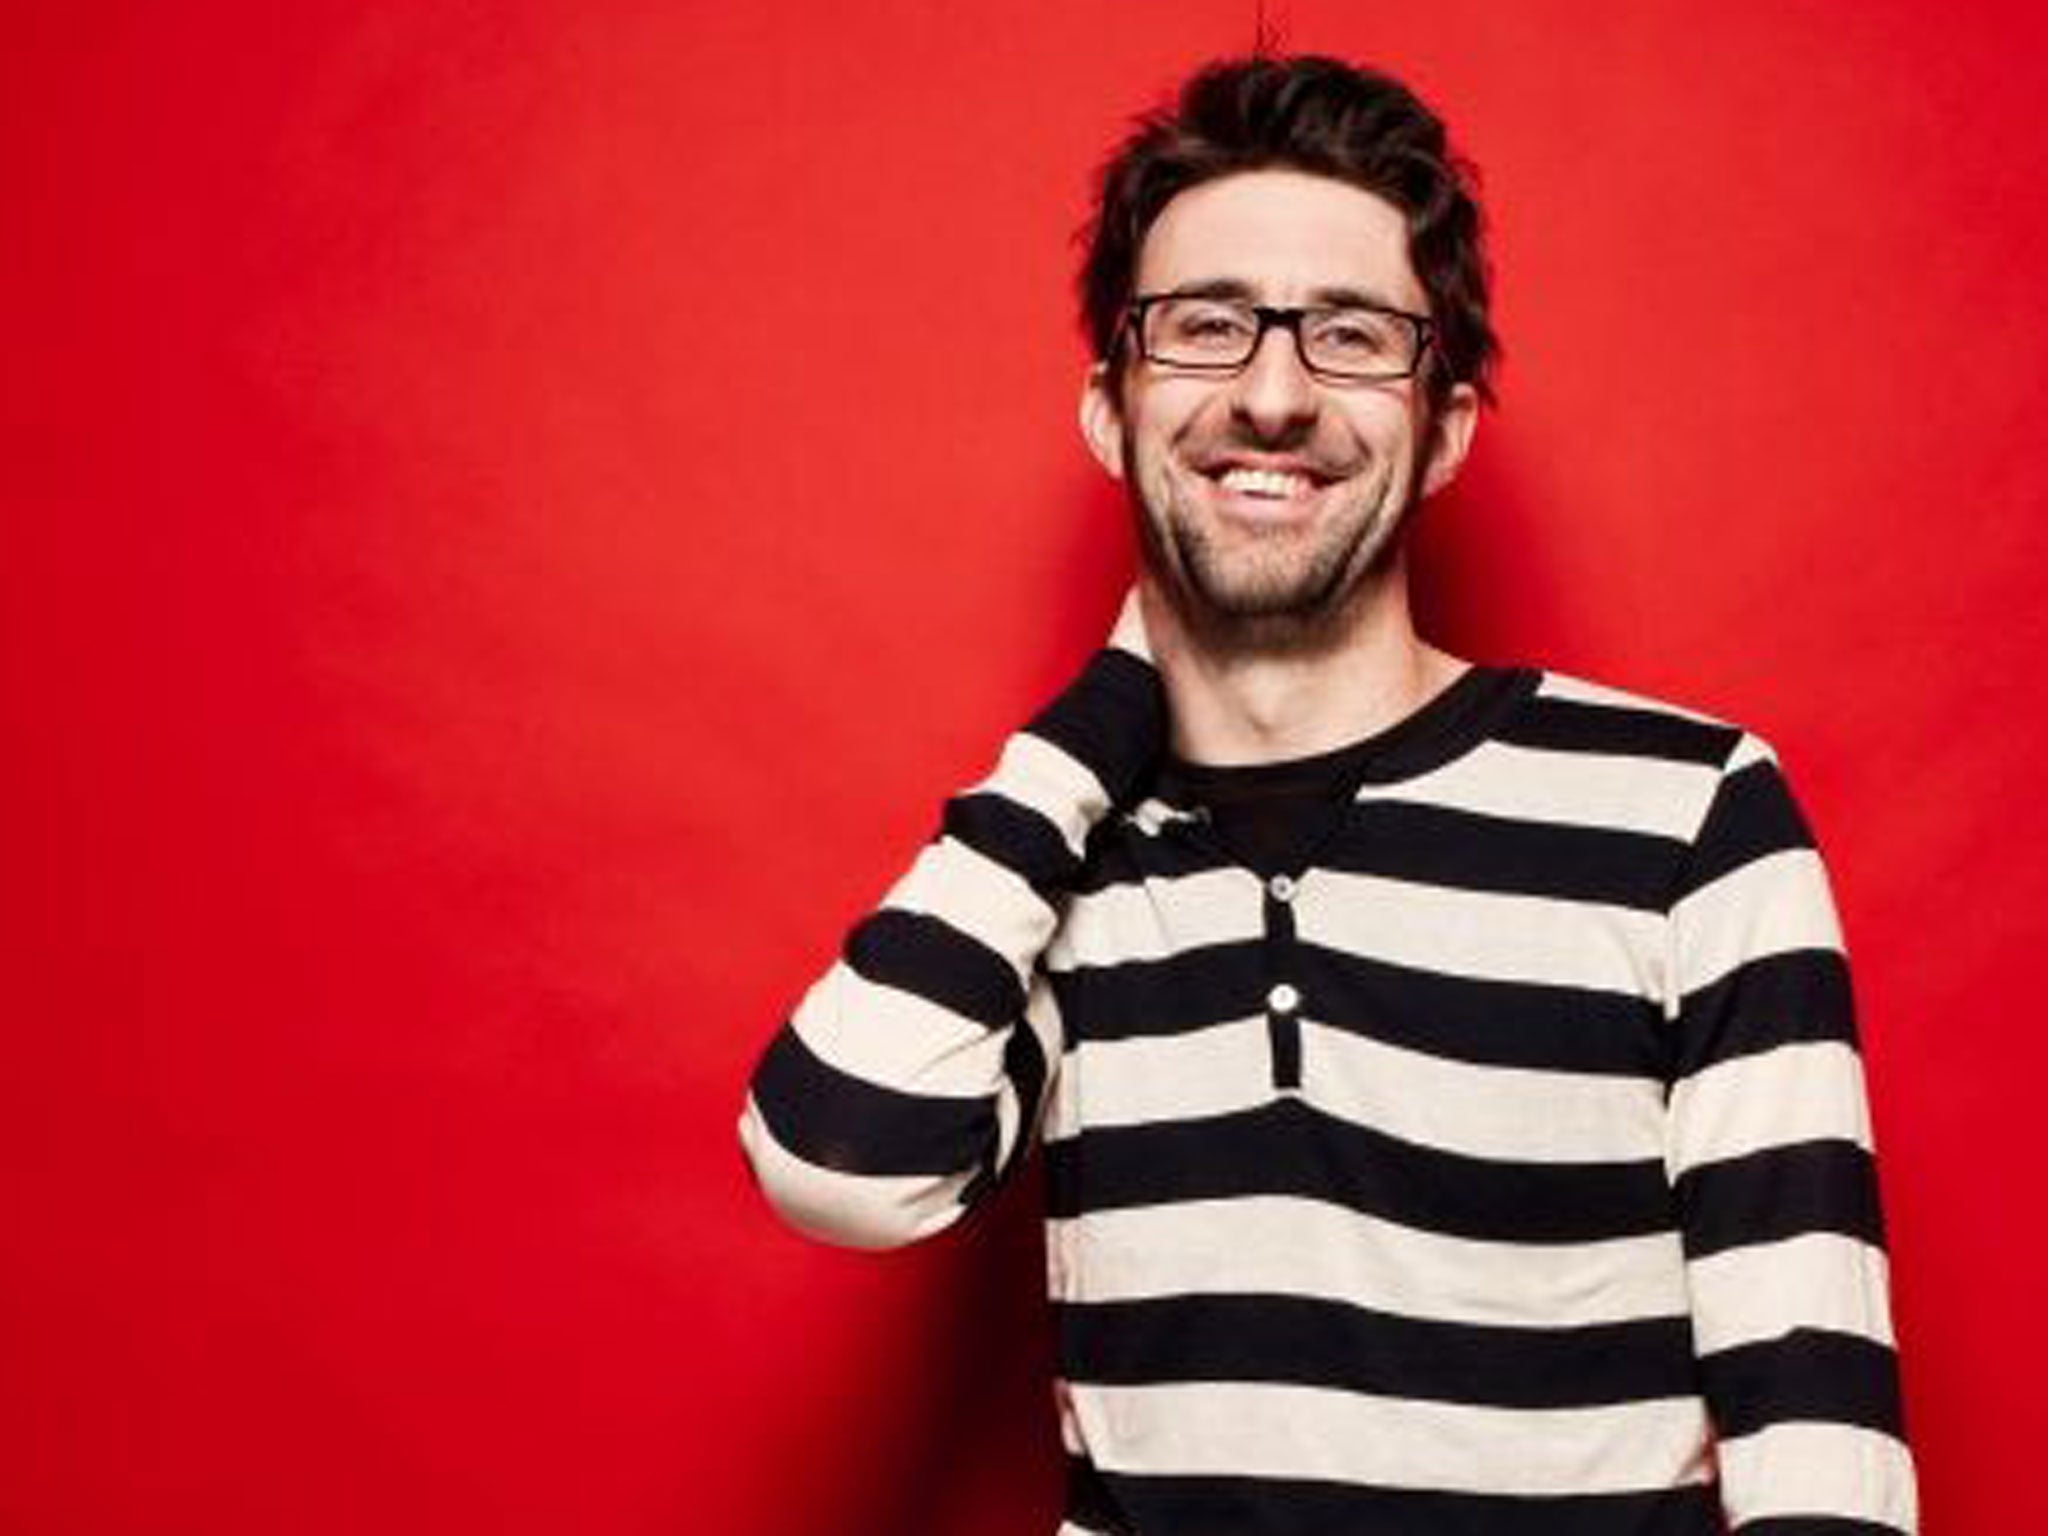 Mark Watson plans 25-hour comedy gig for charity